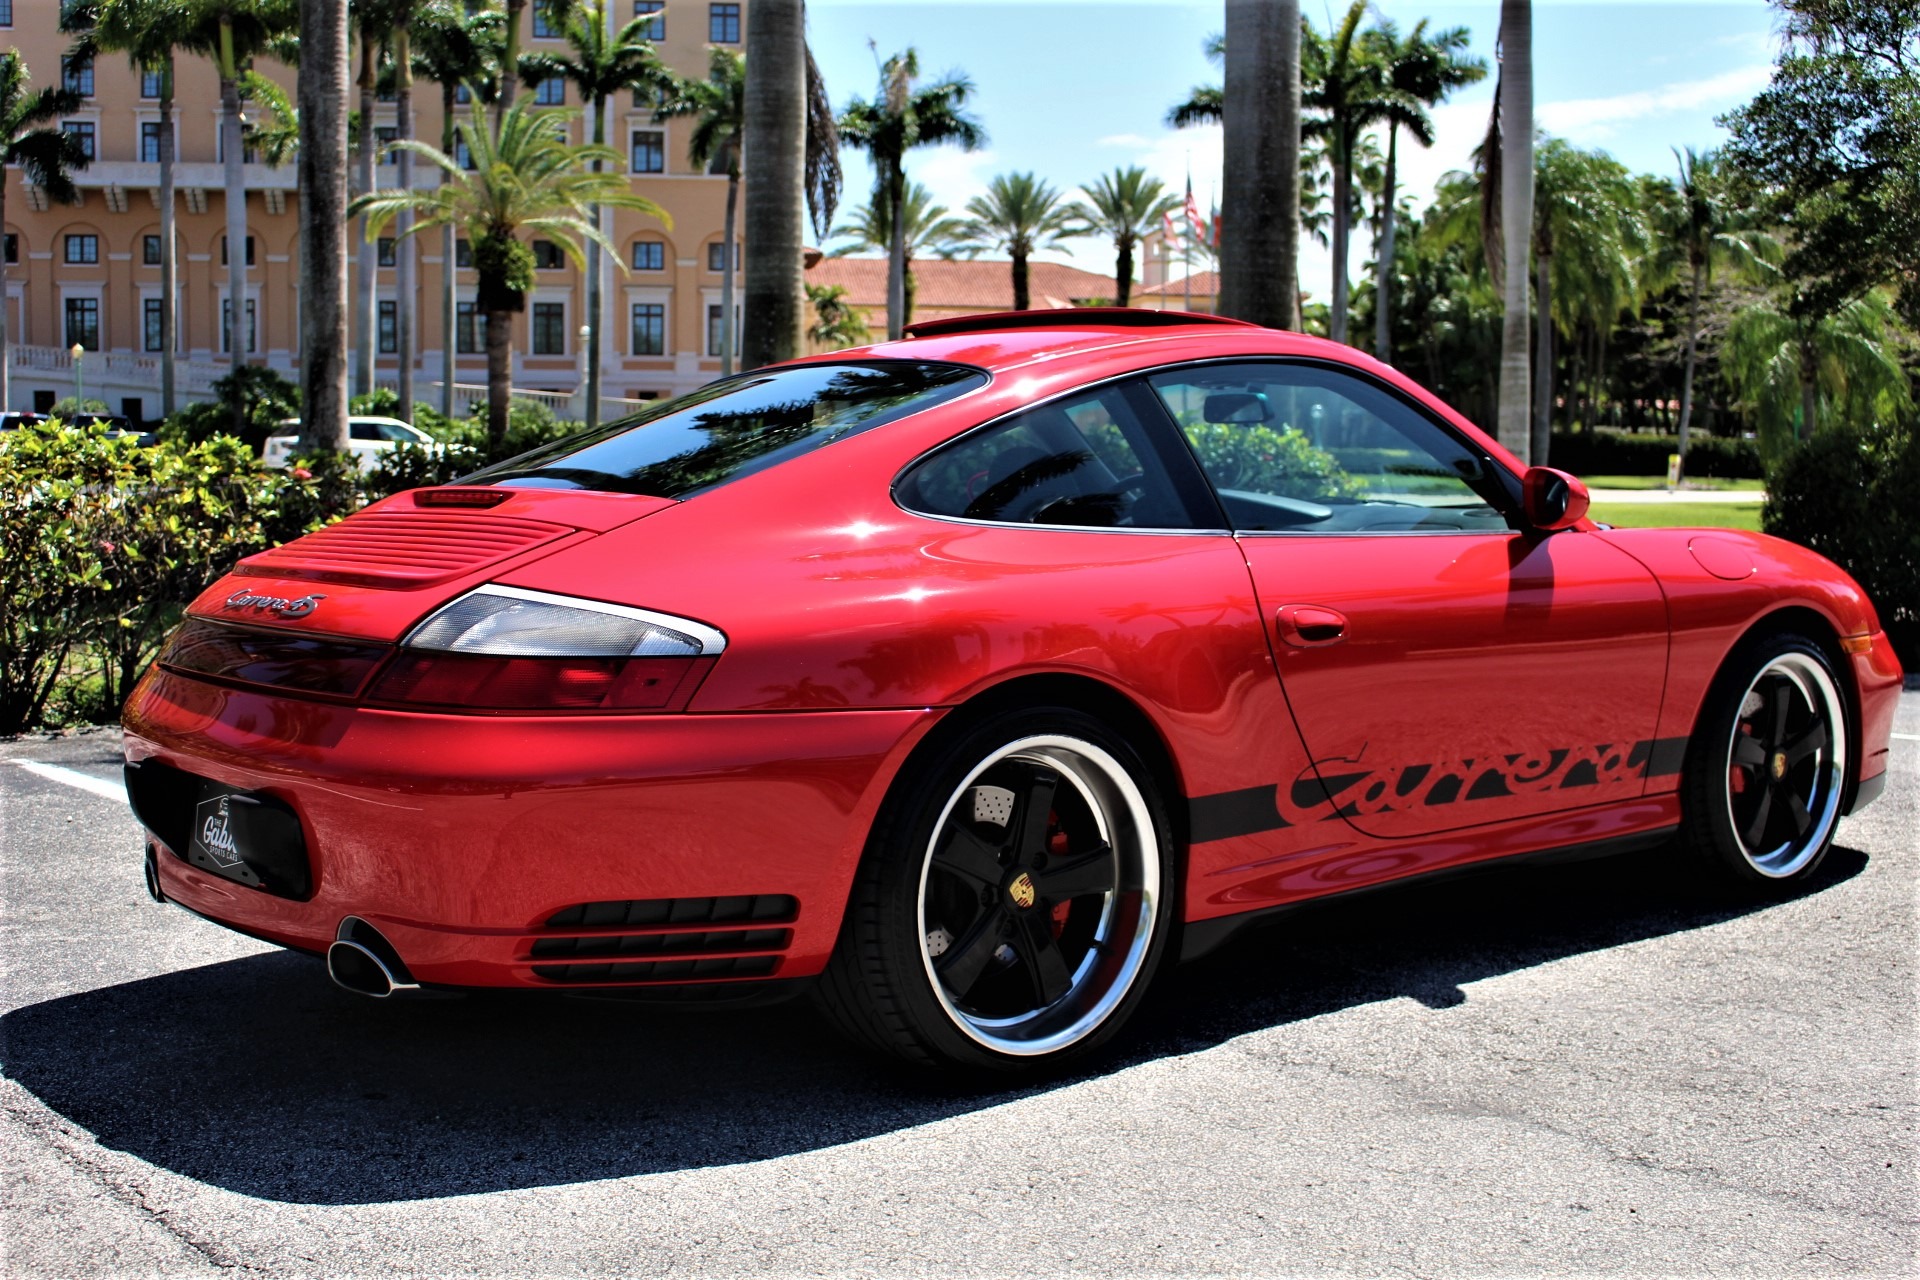 Used 2003 Porsche 911 Carrera 4S for sale Sold at The Gables Sports Cars in Miami FL 33146 2